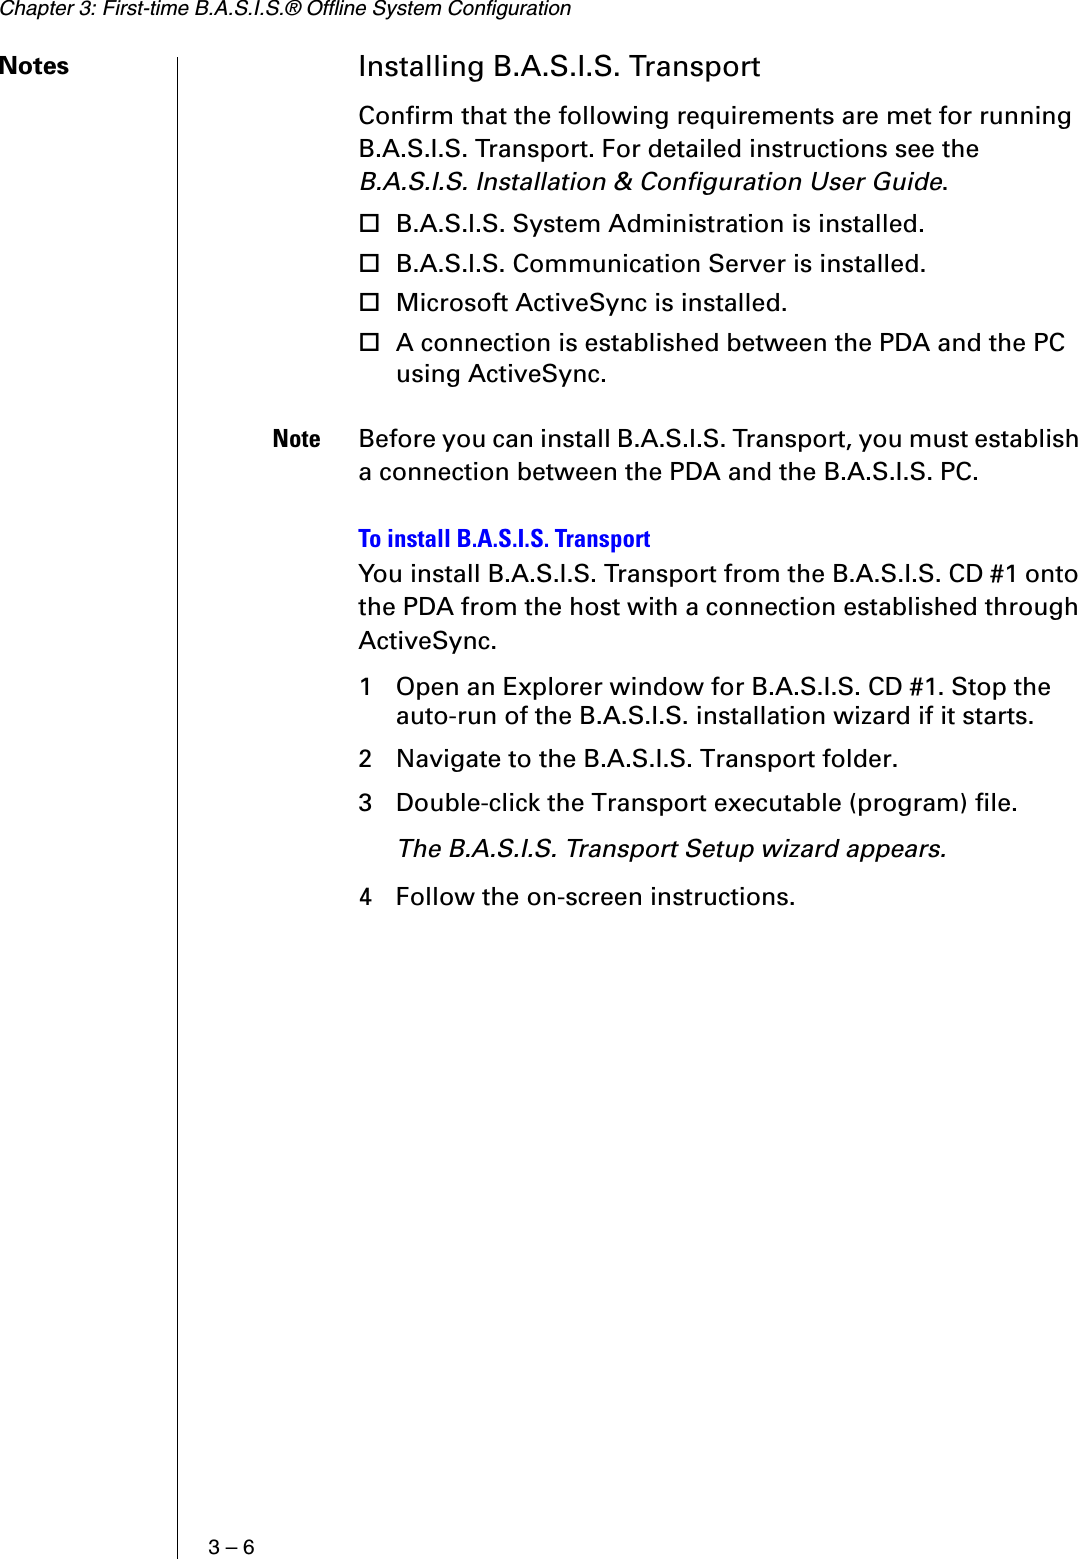 Chapter 3: First-time B.A.S.I.S.® Offline System Configuration3 – 6Notes Installing B.A.S.I.S. TransportConfirm that the following requirements are met for running B.A.S.I.S. Transport. For detailed instructions see the B.A.S.I.S. Installation &amp; Configuration User Guide.B.A.S.I.S. System Administration is installed.B.A.S.I.S. Communication Server is installed.Microsoft ActiveSync is installed.A connection is established between the PDA and the PC using ActiveSync.Note Before you can install B.A.S.I.S. Transport, you must establish a connection between the PDA and the B.A.S.I.S. PC.To install B.A.S.I.S. TransportYou install B.A.S.I.S. Transport from the B.A.S.I.S. CD #1 onto the PDA from the host with a connection established through ActiveSync.1 Open an Explorer window for B.A.S.I.S. CD #1. Stop the auto-run of the B.A.S.I.S. installation wizard if it starts.2 Navigate to the B.A.S.I.S. Transport folder.3 Double-click the Transport executable (program) file.The B.A.S.I.S. Transport Setup wizard appears.4 Follow the on-screen instructions.